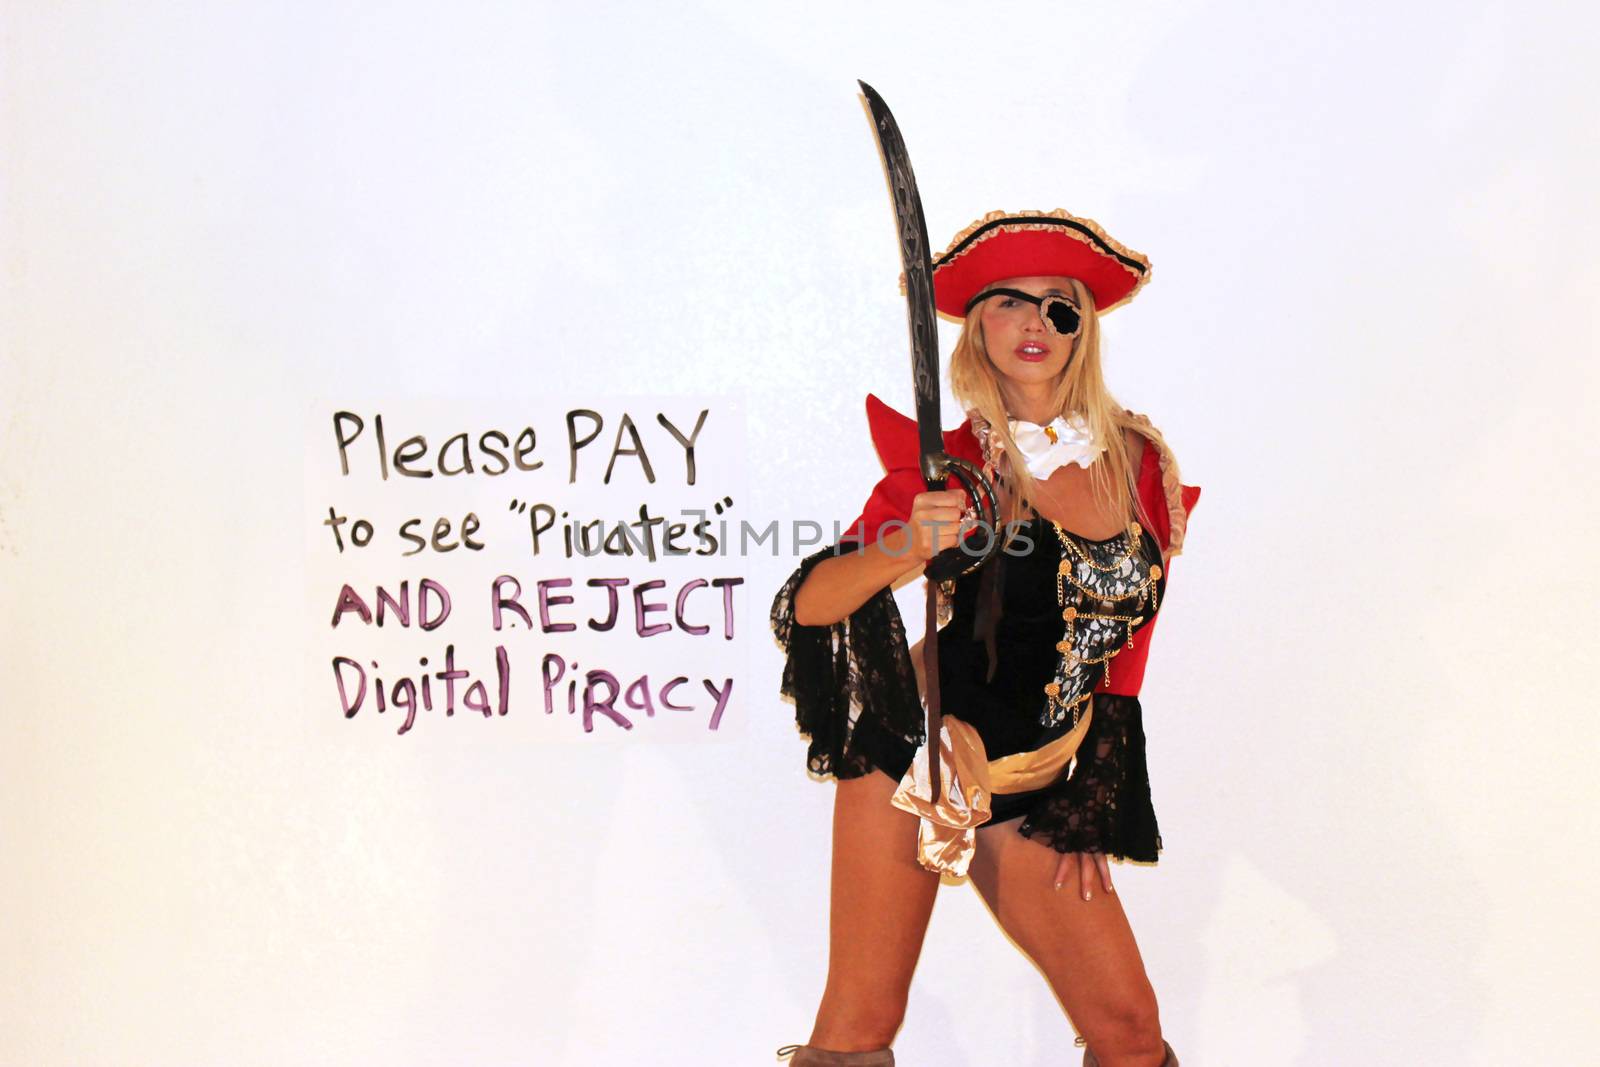 Nadeea Volianova the Russian Pop Star - a lifelong Johnny Depp fan - urges people to pay to see the new Pirates movie and ignore the pirated copy that hackers released, Beverly Hills, CA 05-25-17/ImageCollect by ImageCollect